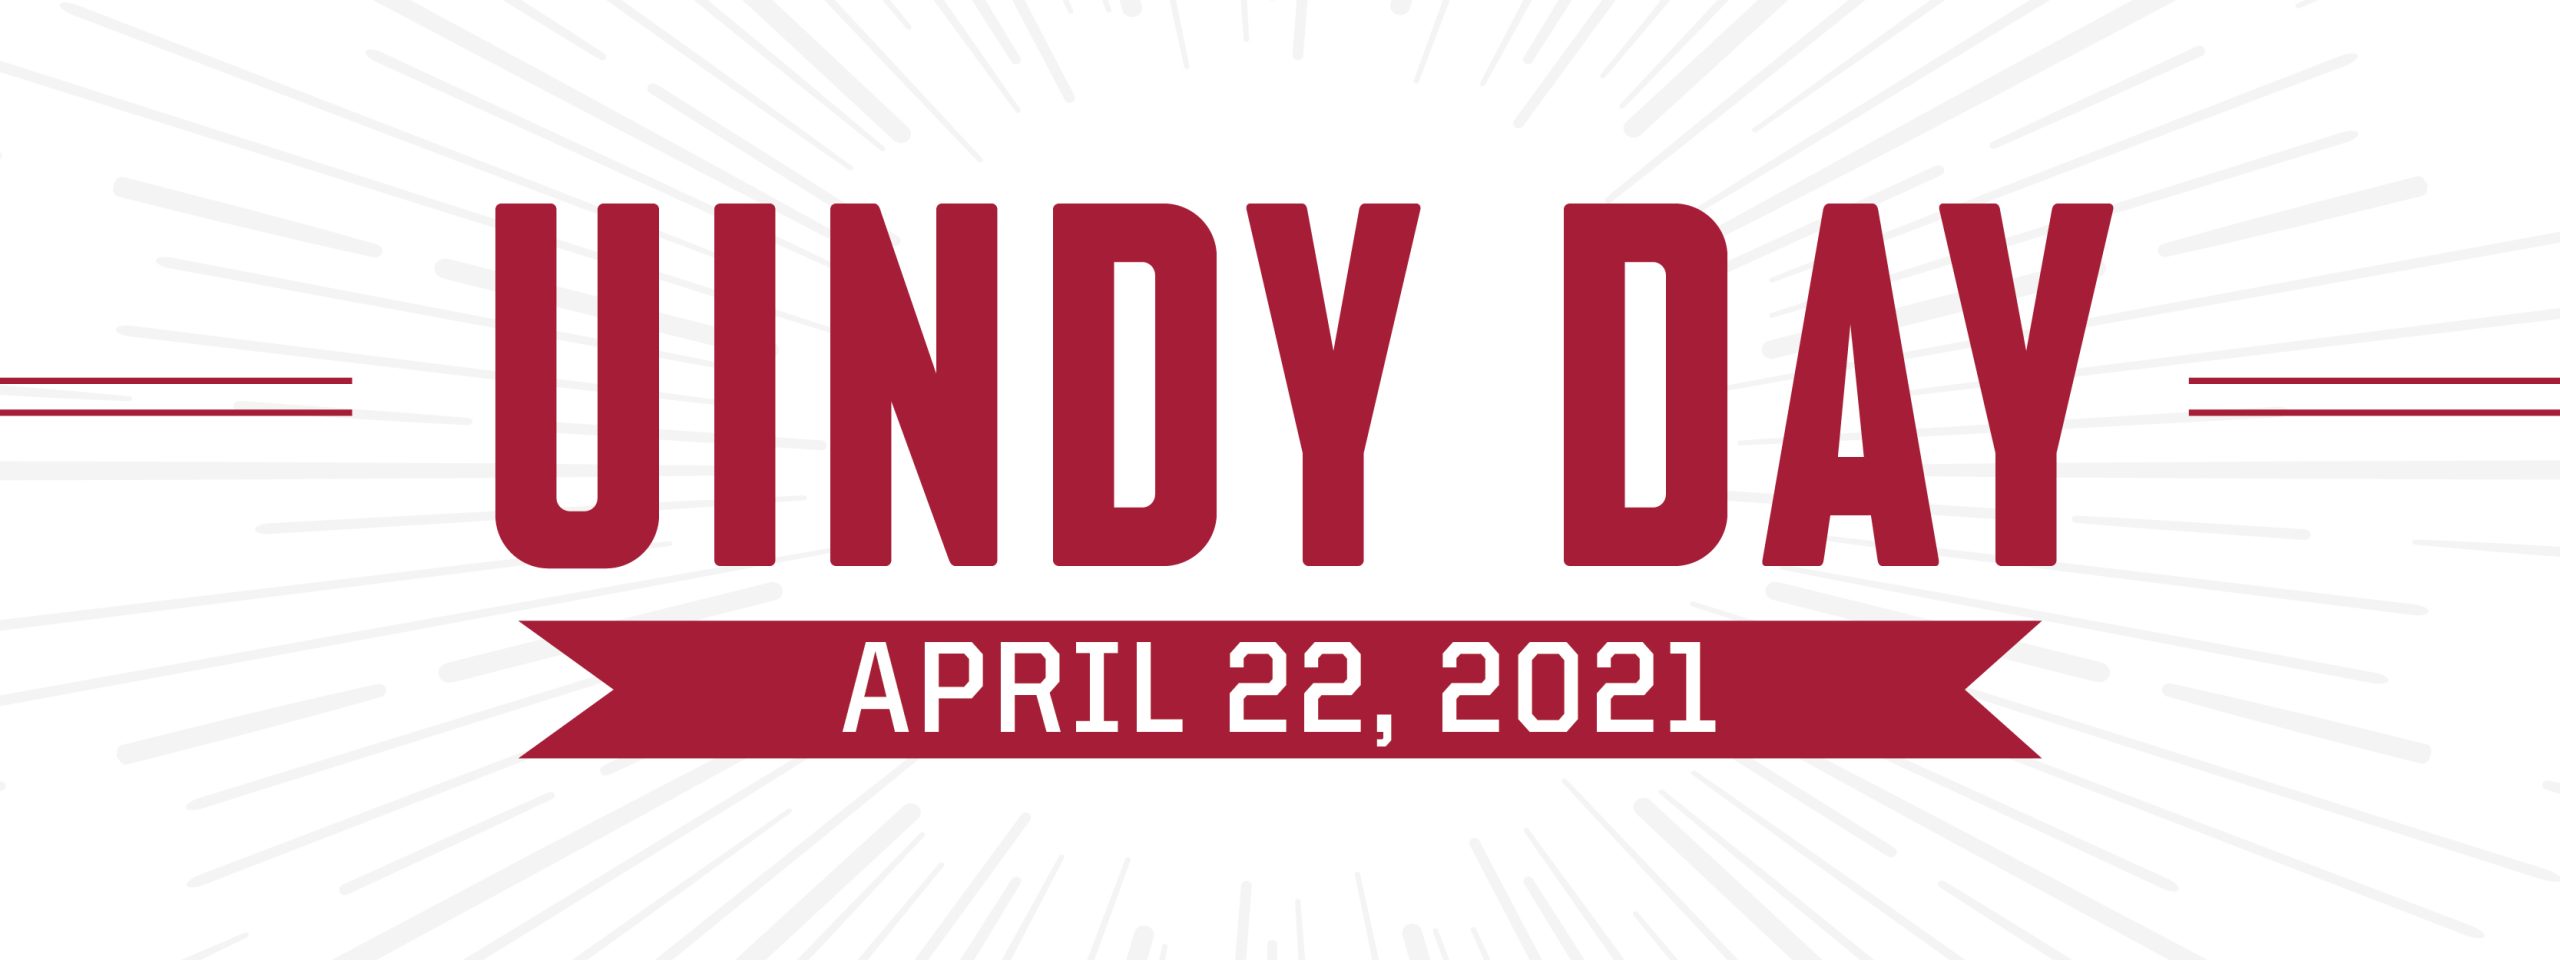 uindy day 2021